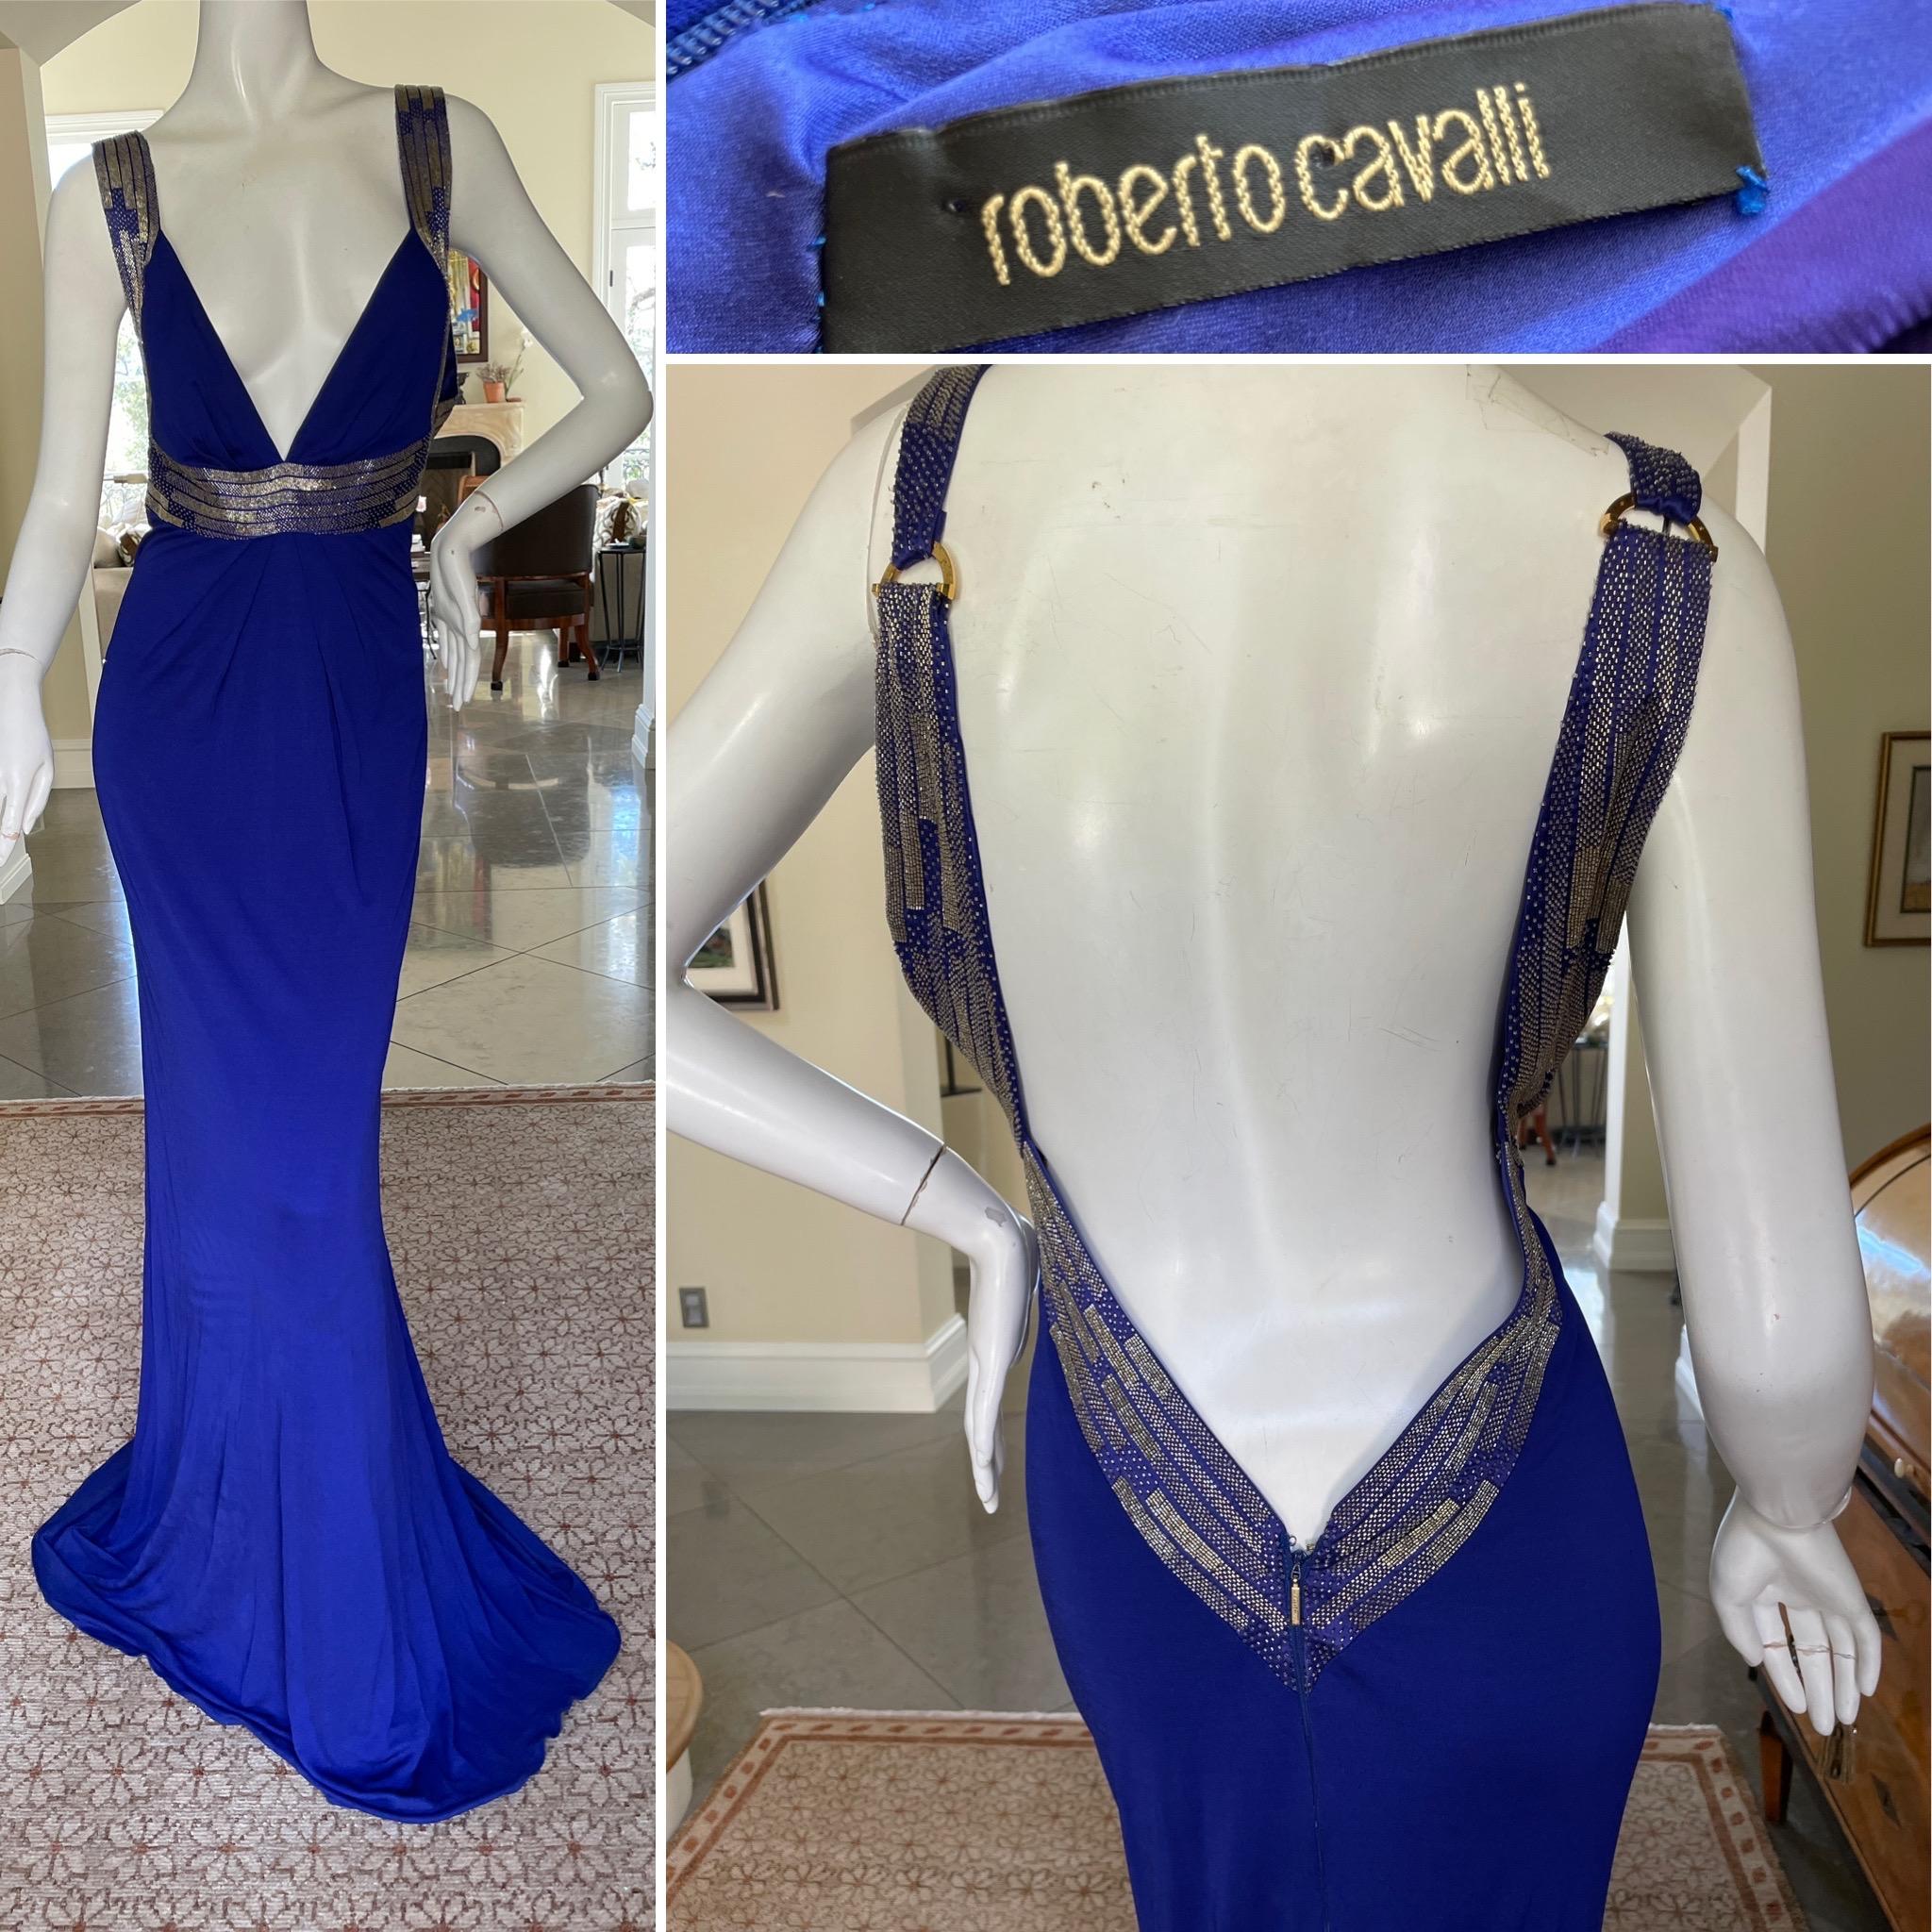 Roberto Cavalli Vintage Crystal Embellished Evening Dress with Plunging Front and Back.
Simply sensational
 Size 46
 Bust 36